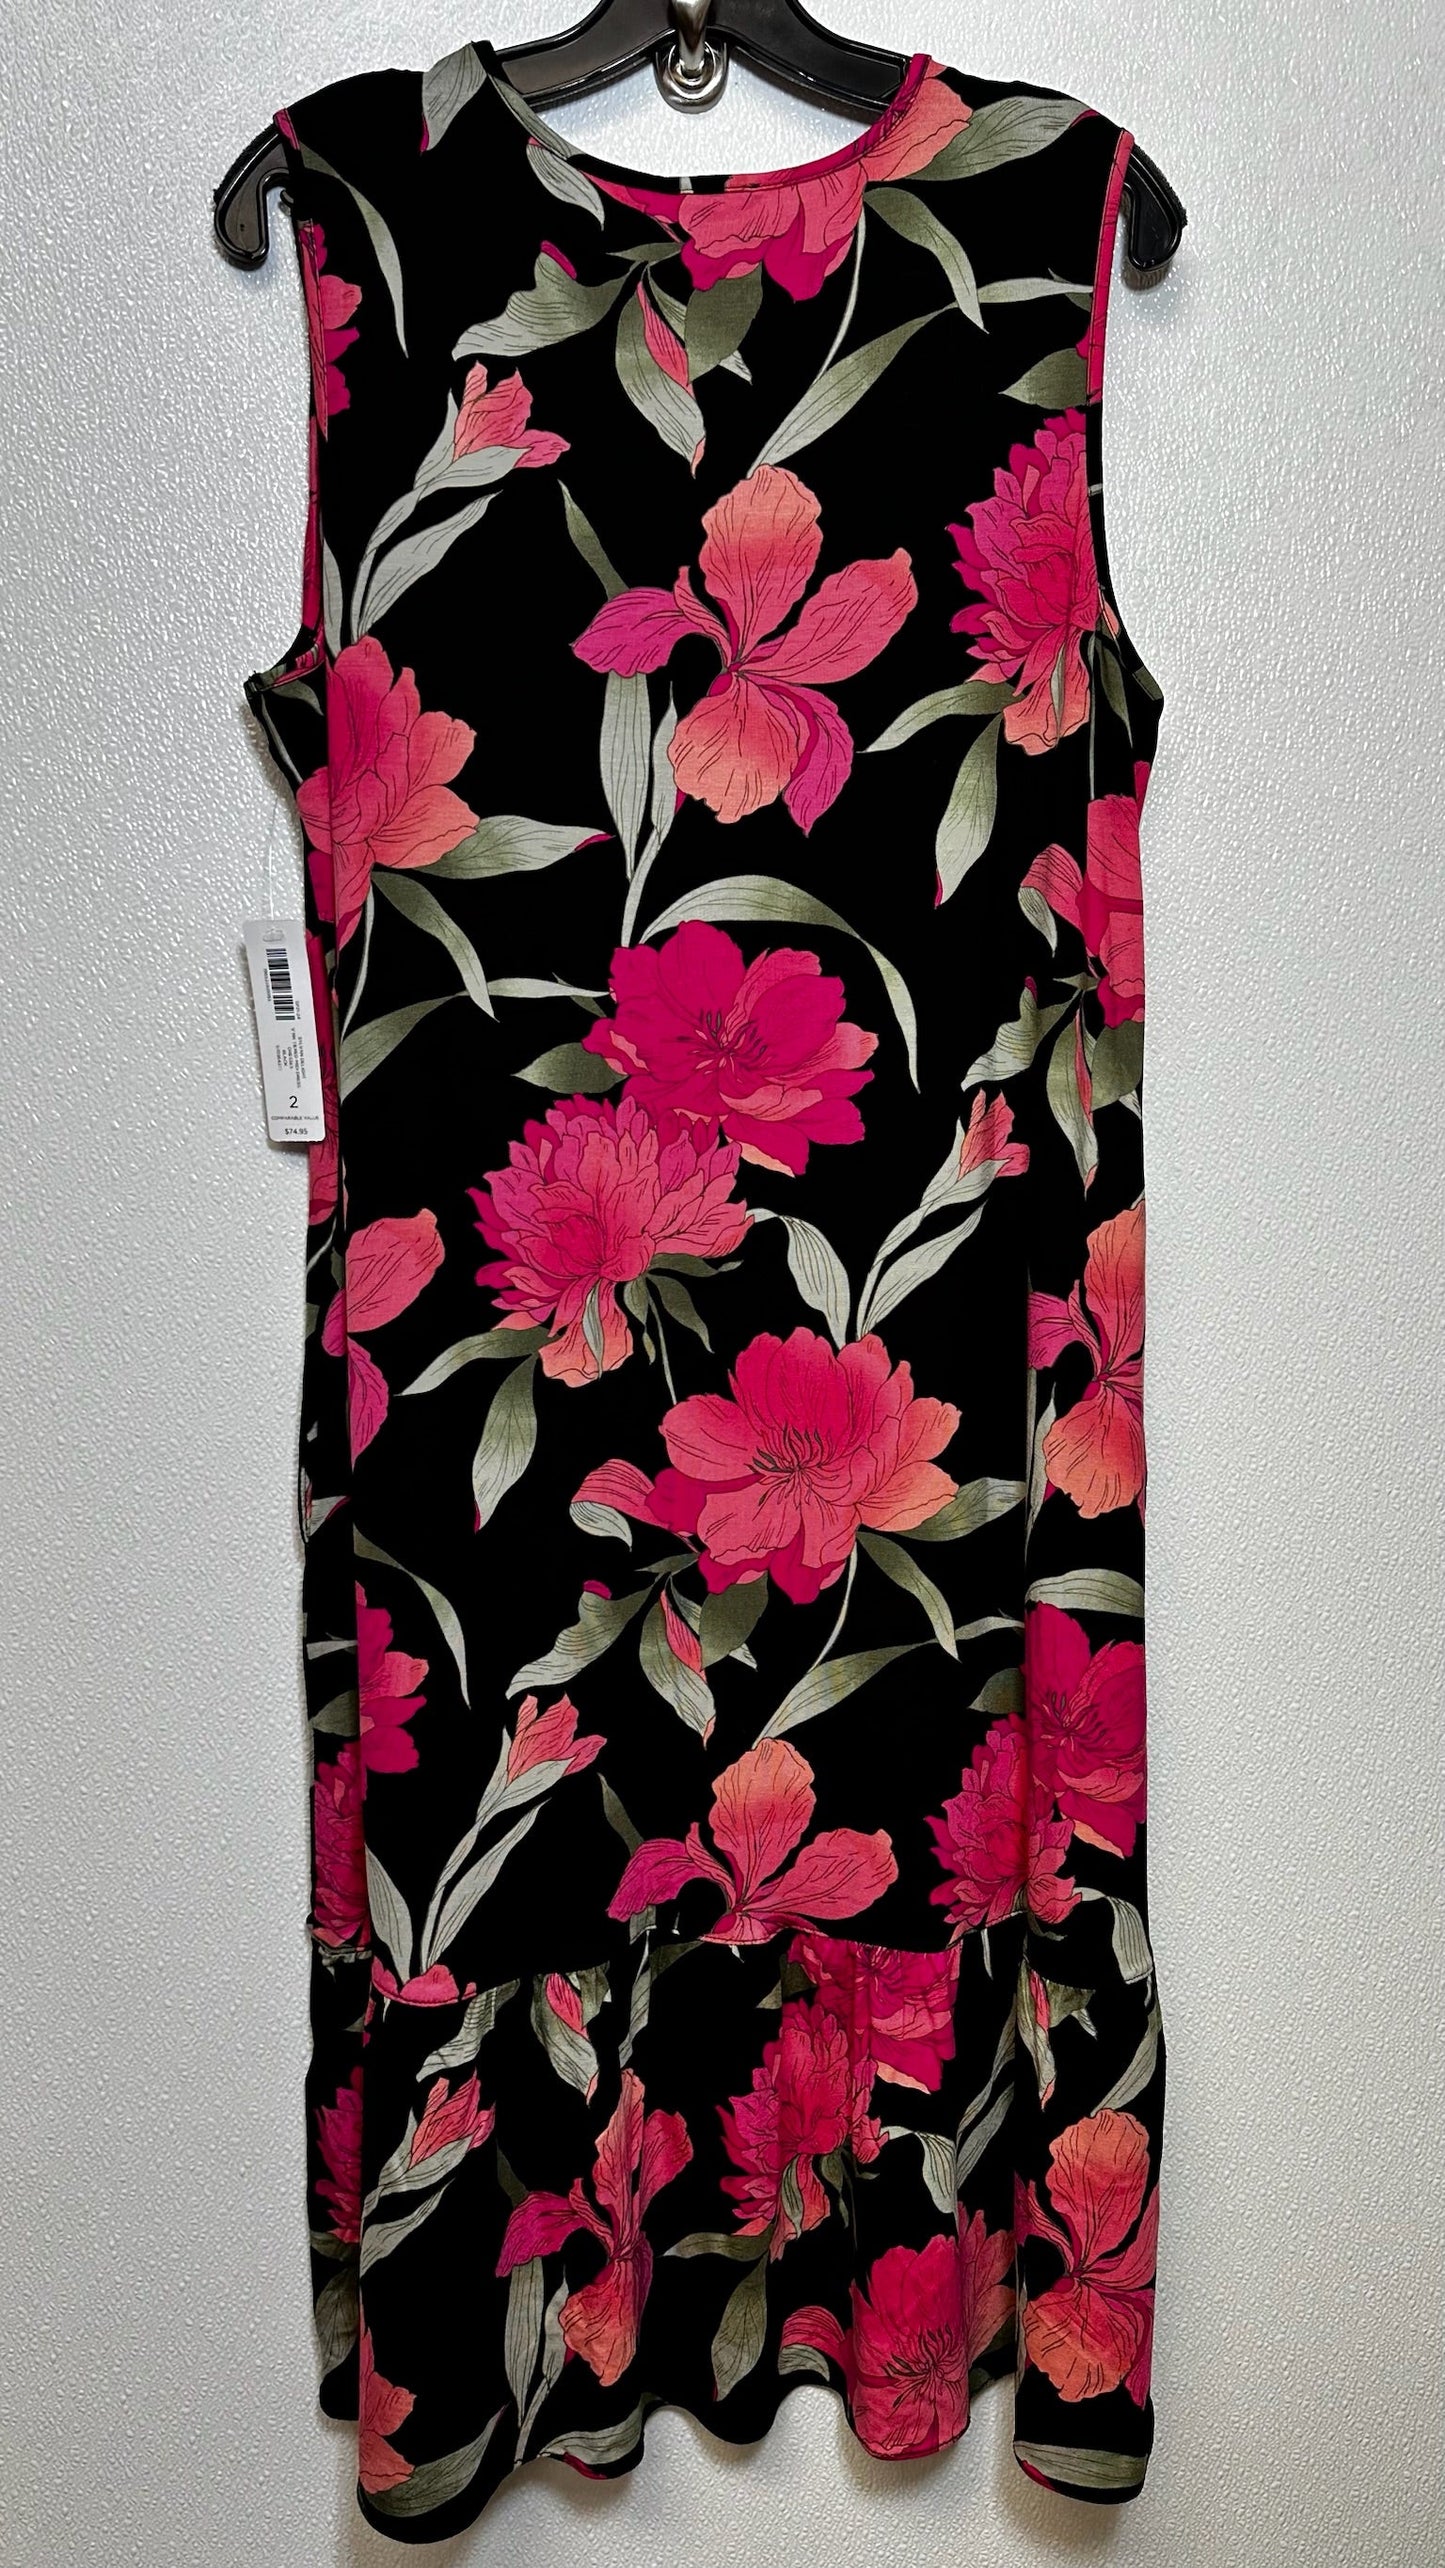 Floral Dress Casual Short Chicos O, Size 12